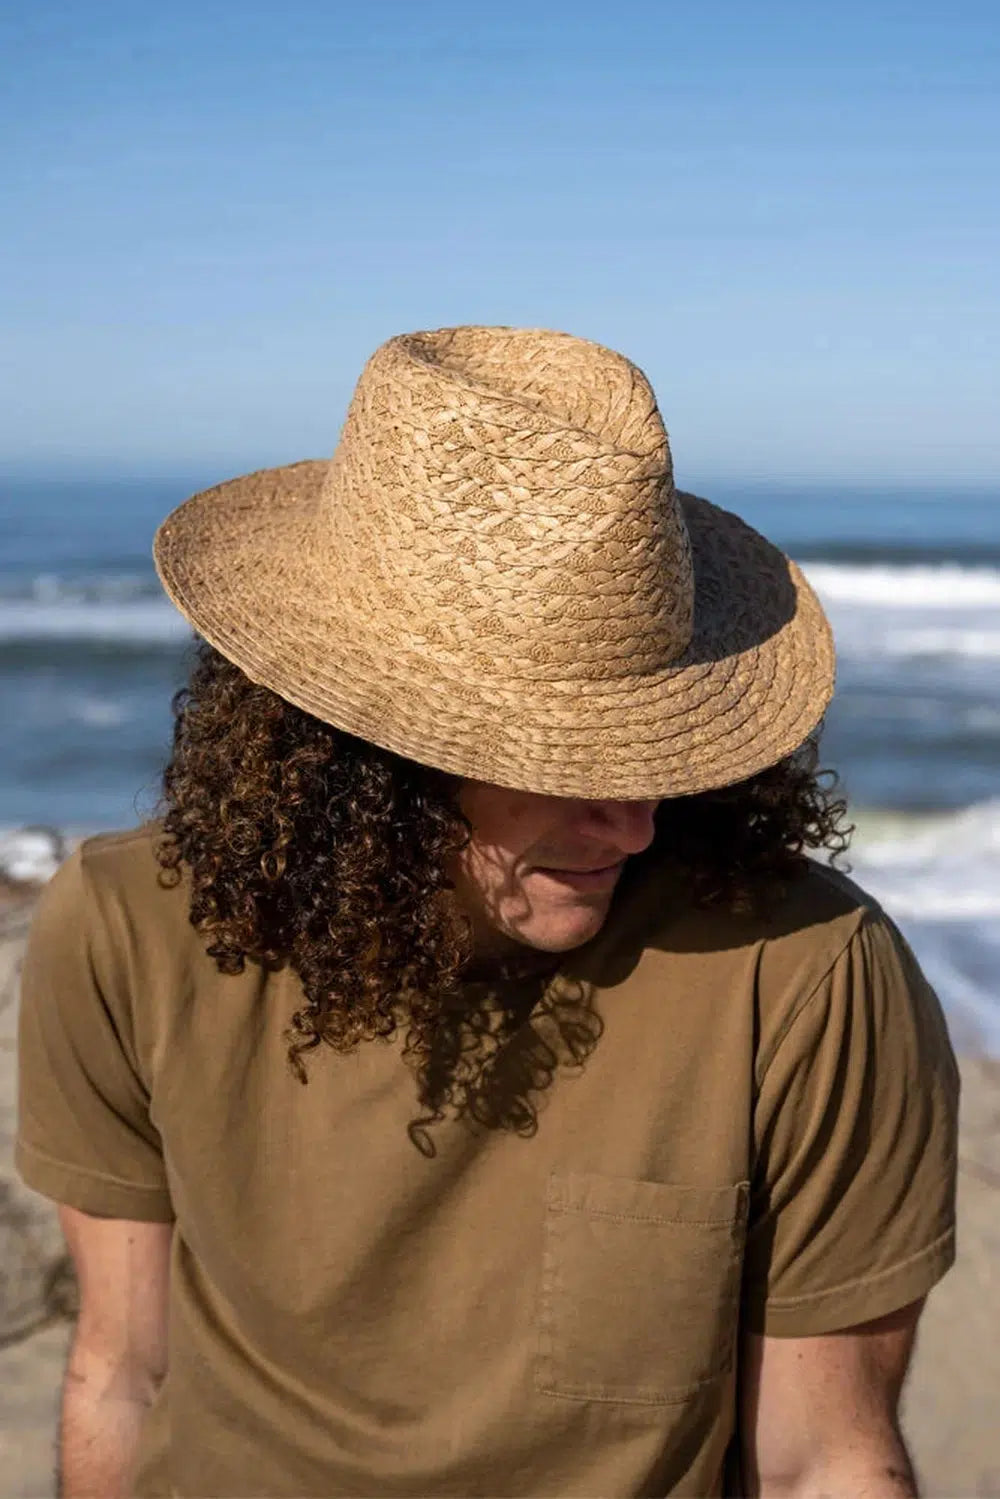 A curly haired man wearing a brown shirt and a straw sun hat sitting by the seashore